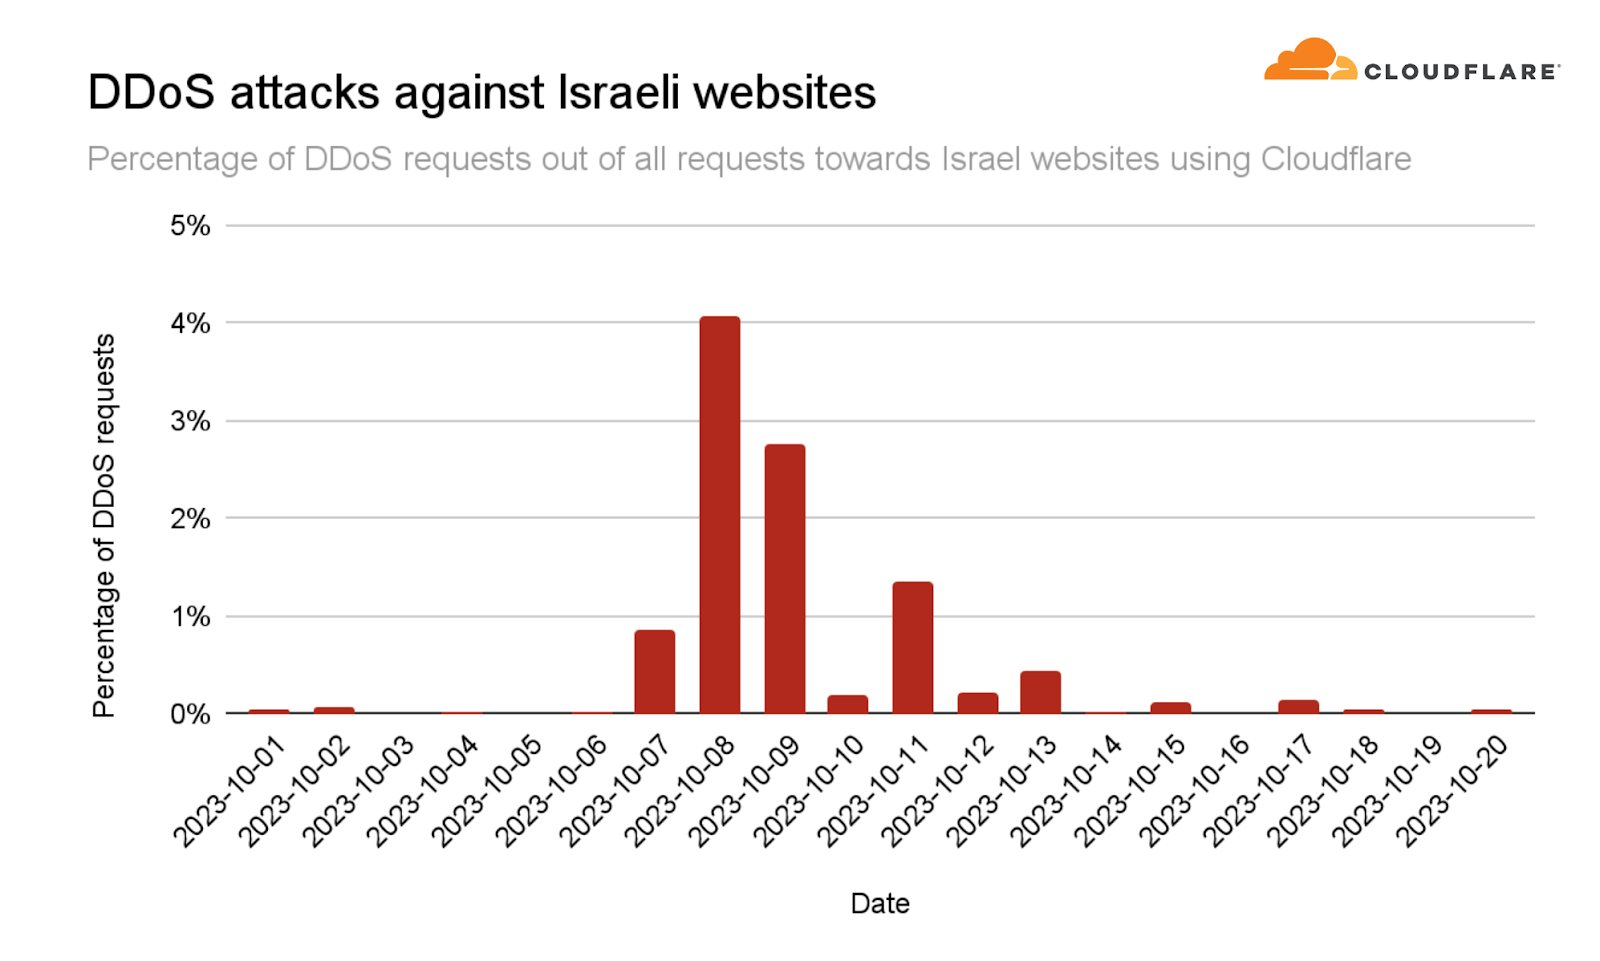 Percentage of DDoS requests out of all requests towards Israeli websites using Cloudflare